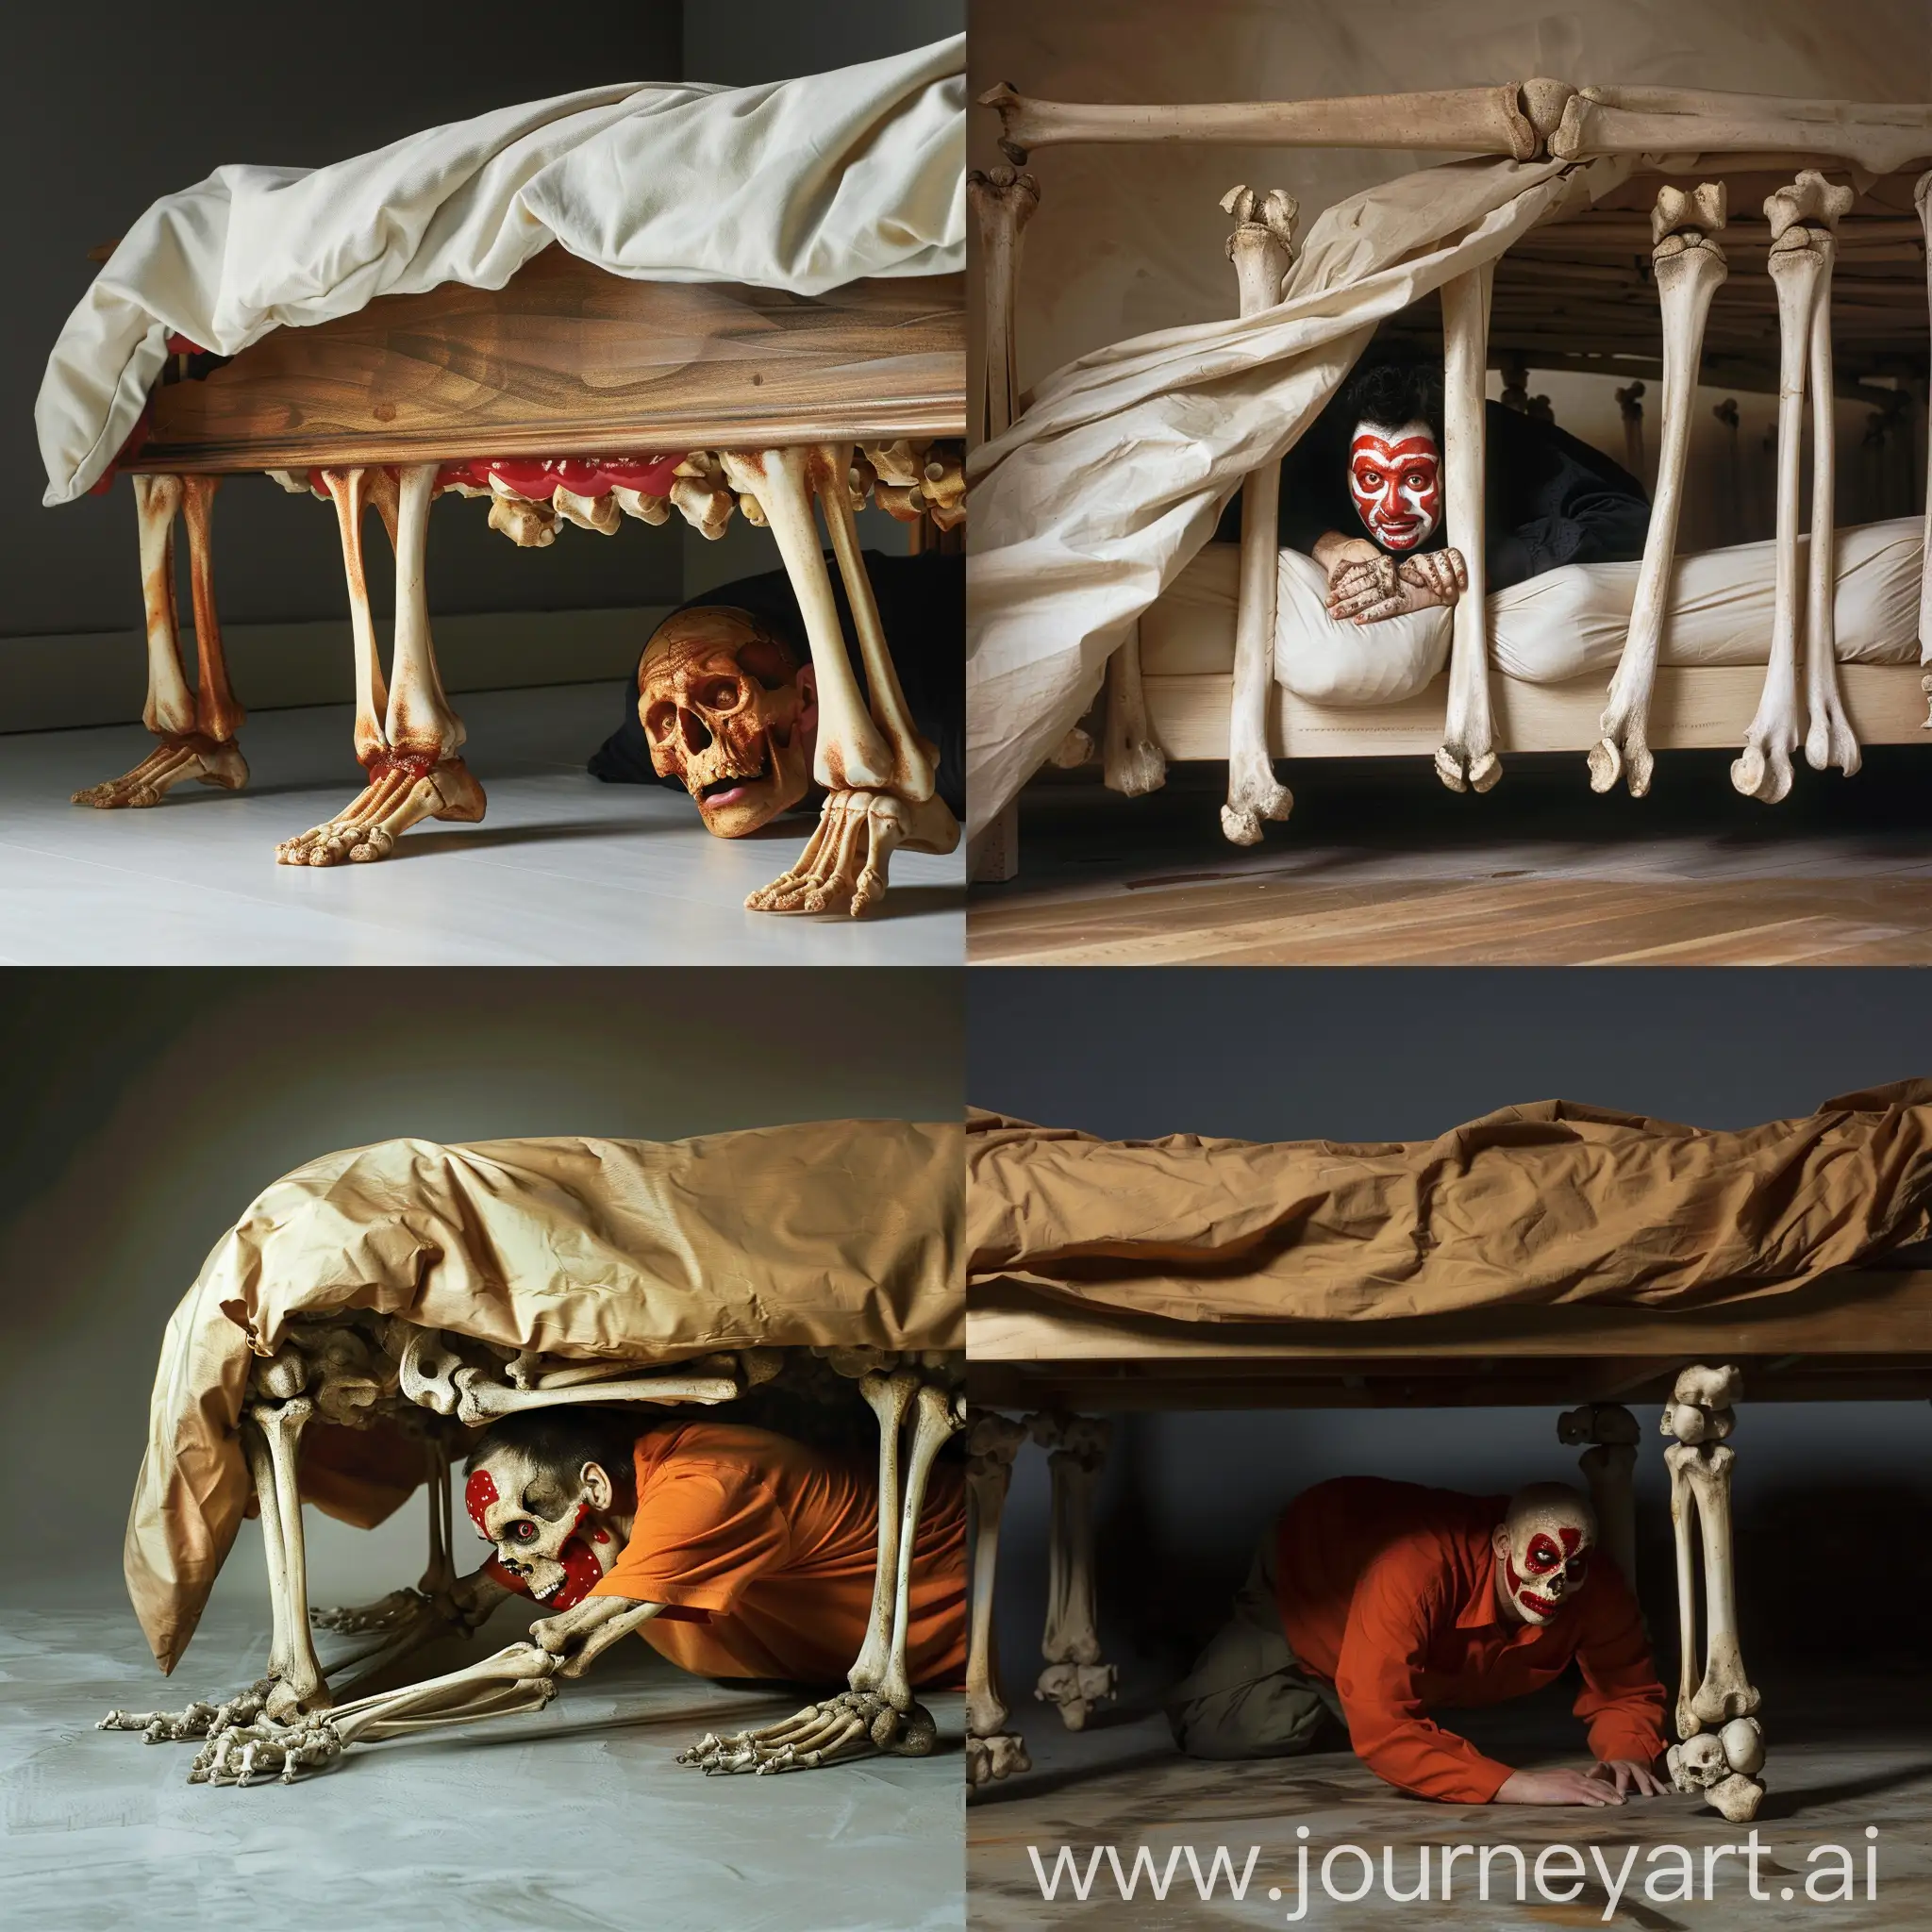 Fearless-Man-Crawling-under-Bone-Bed-in-Surreal-Scene